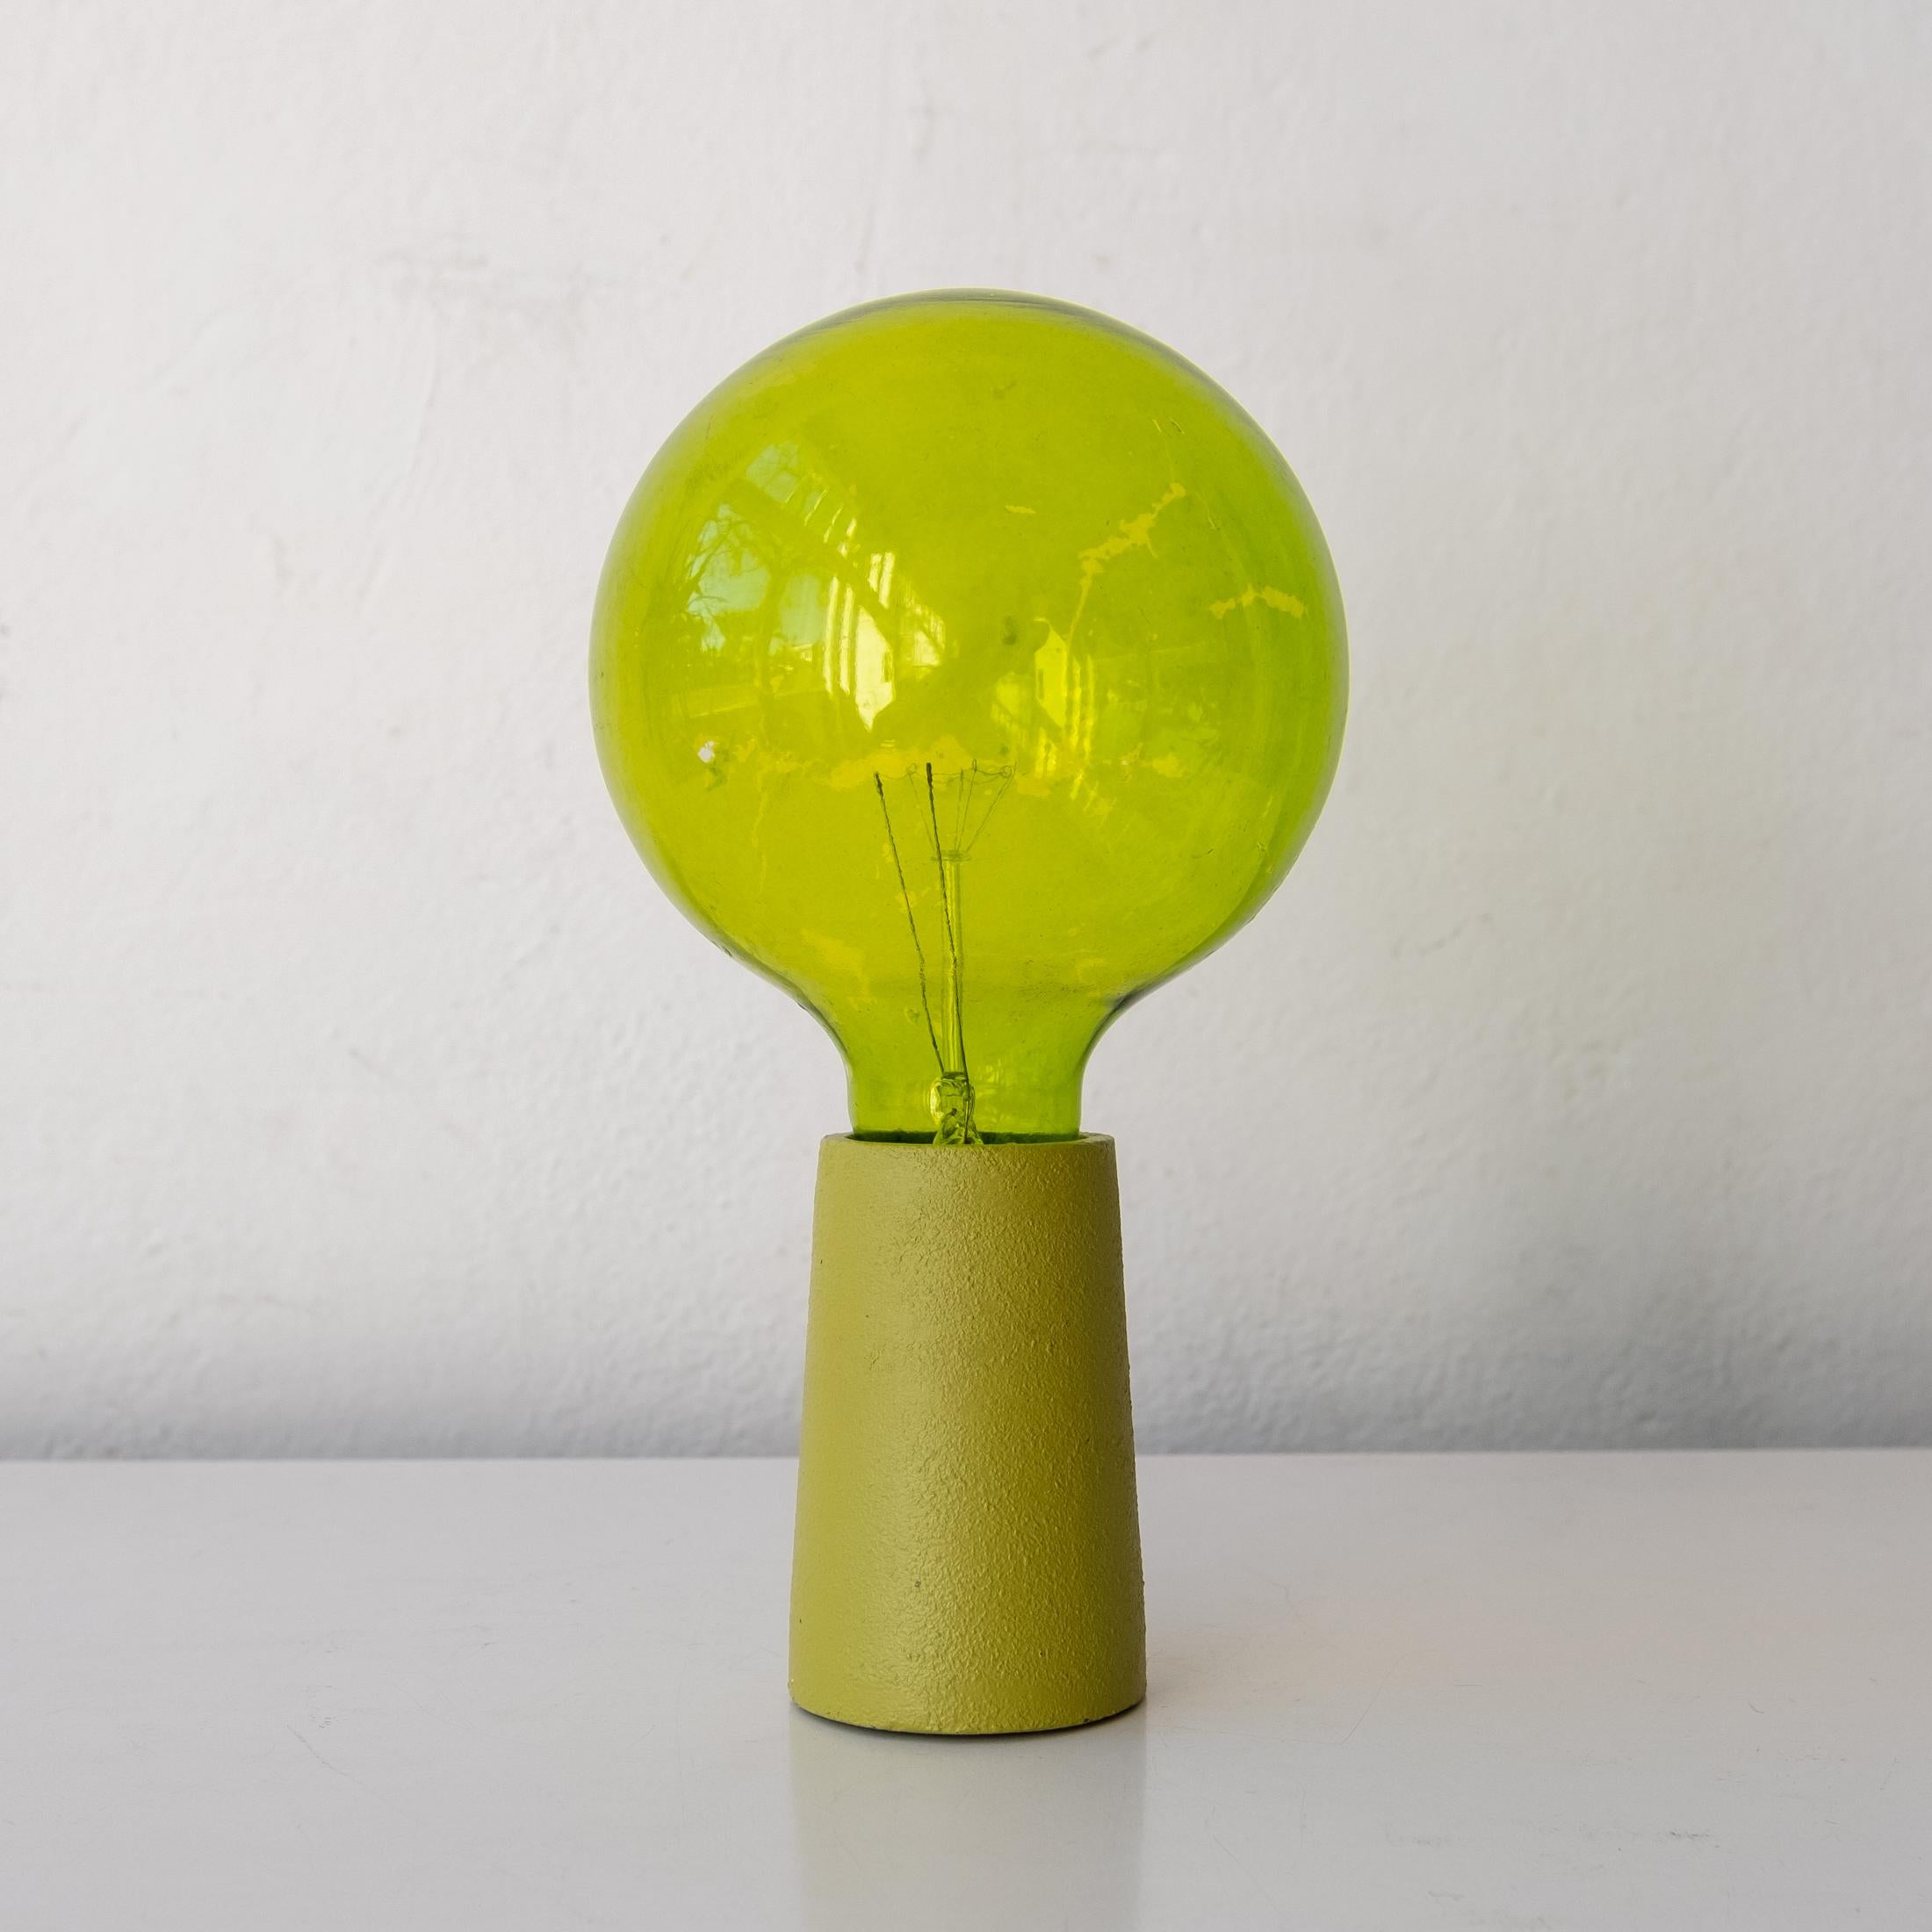 Mid-20th Century Design Line Lamp by Bill Curry 1960s California Design